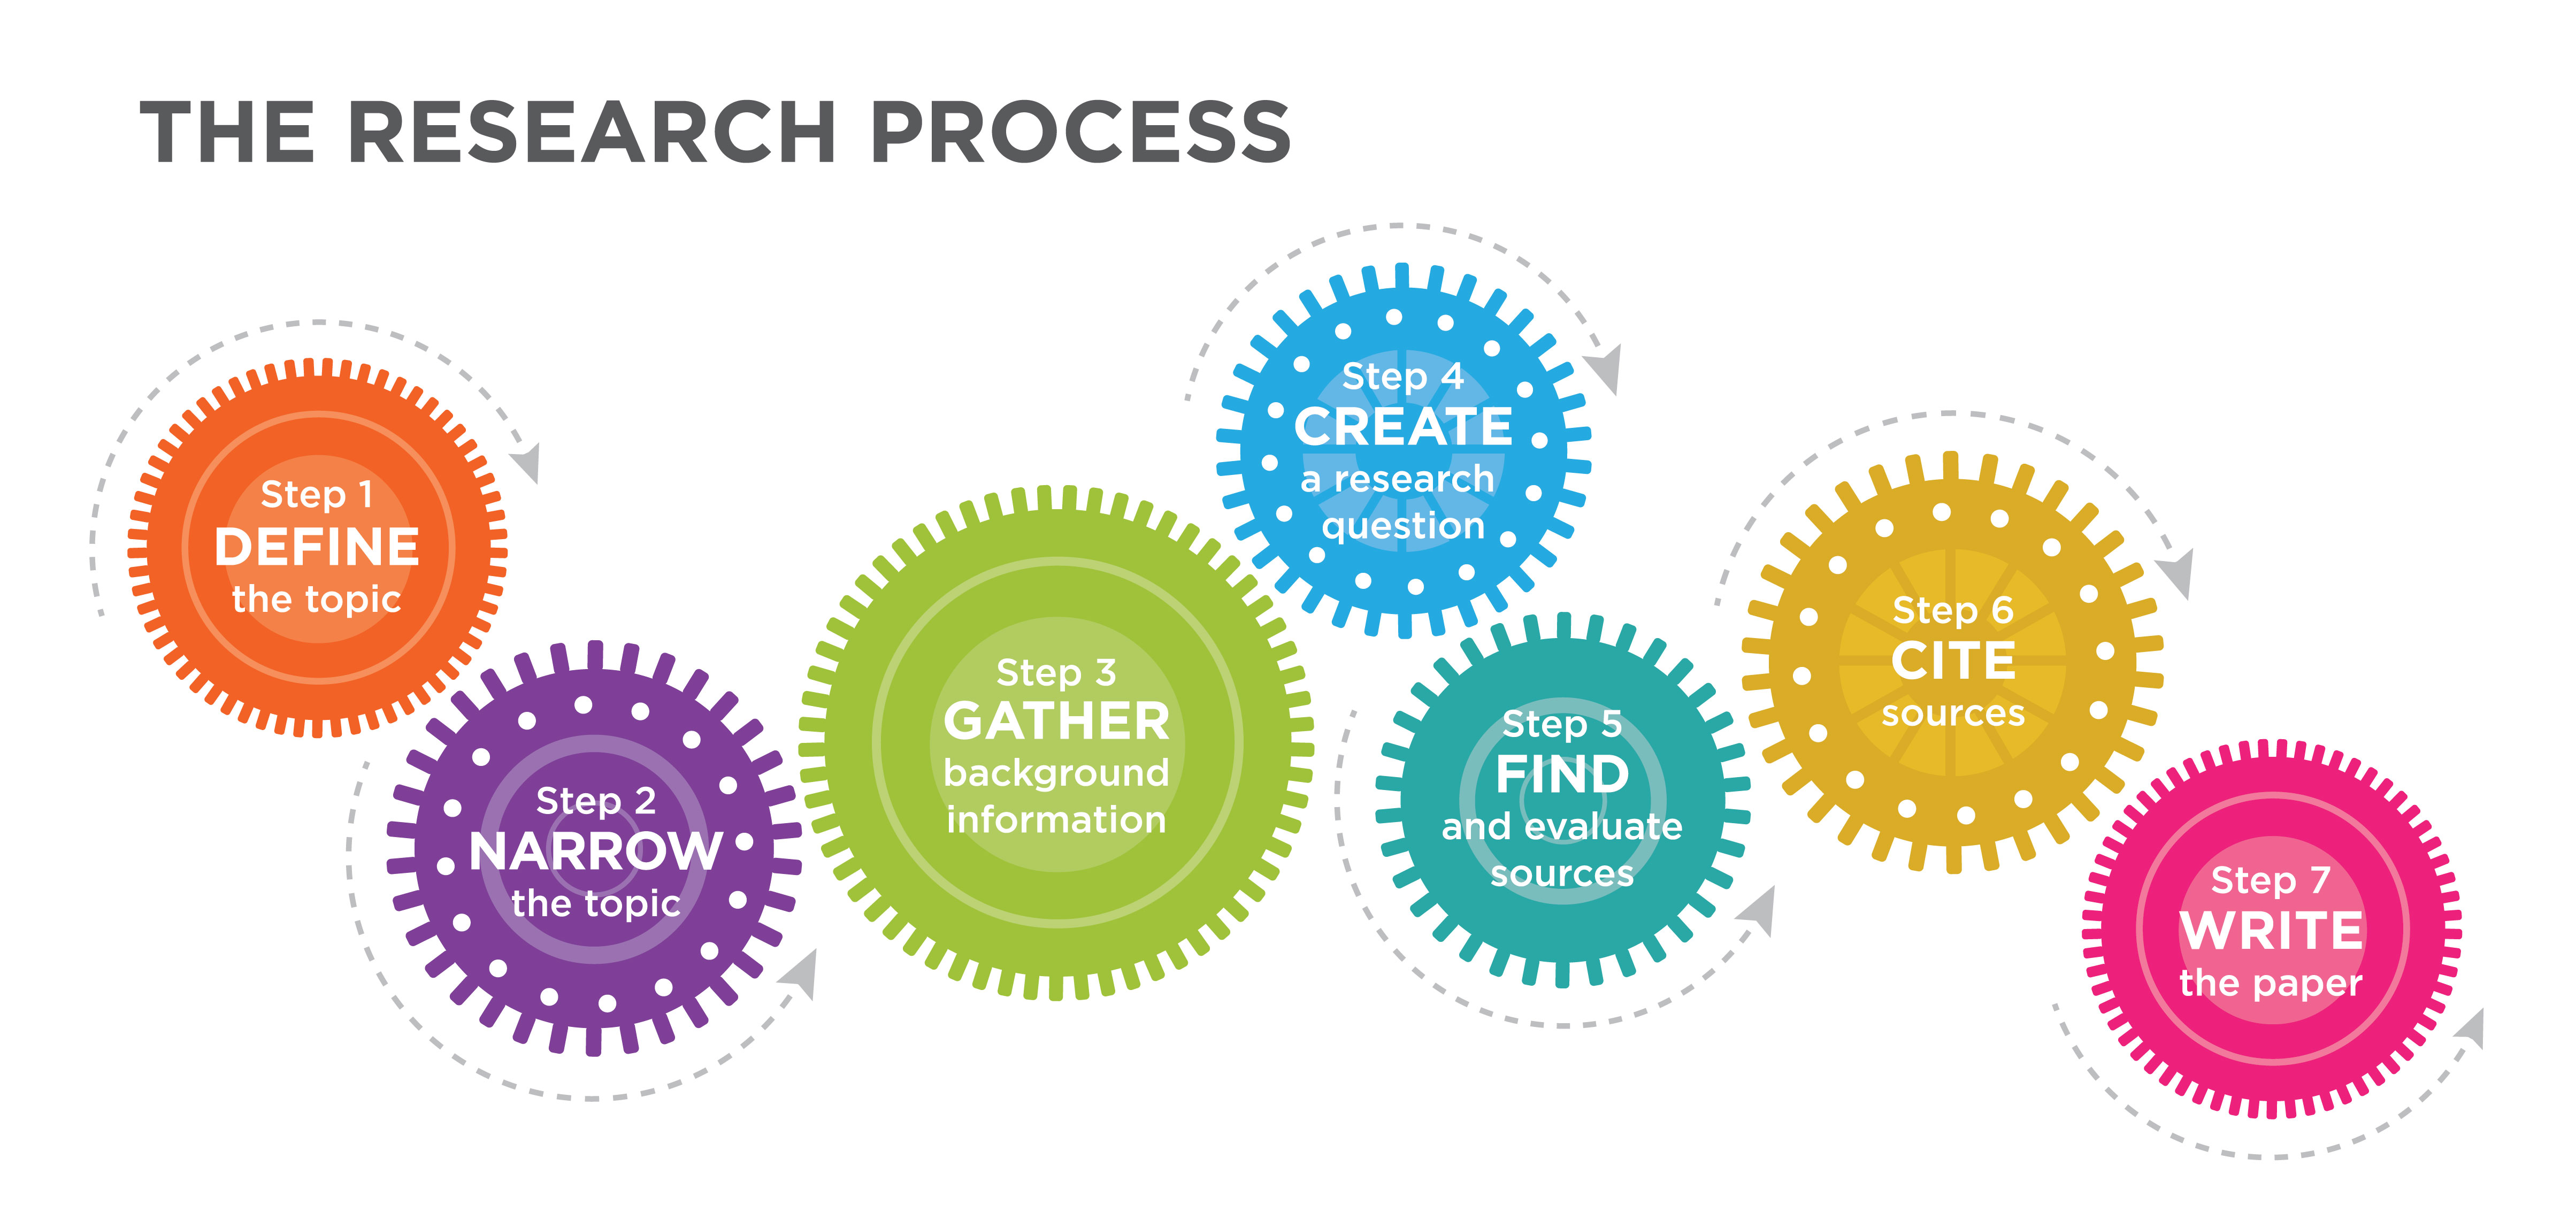 Gears showing the research process: define the topic, narrow the topic, gather background information, create a research question, find and evaluate sources, cite sources, and write the paper.